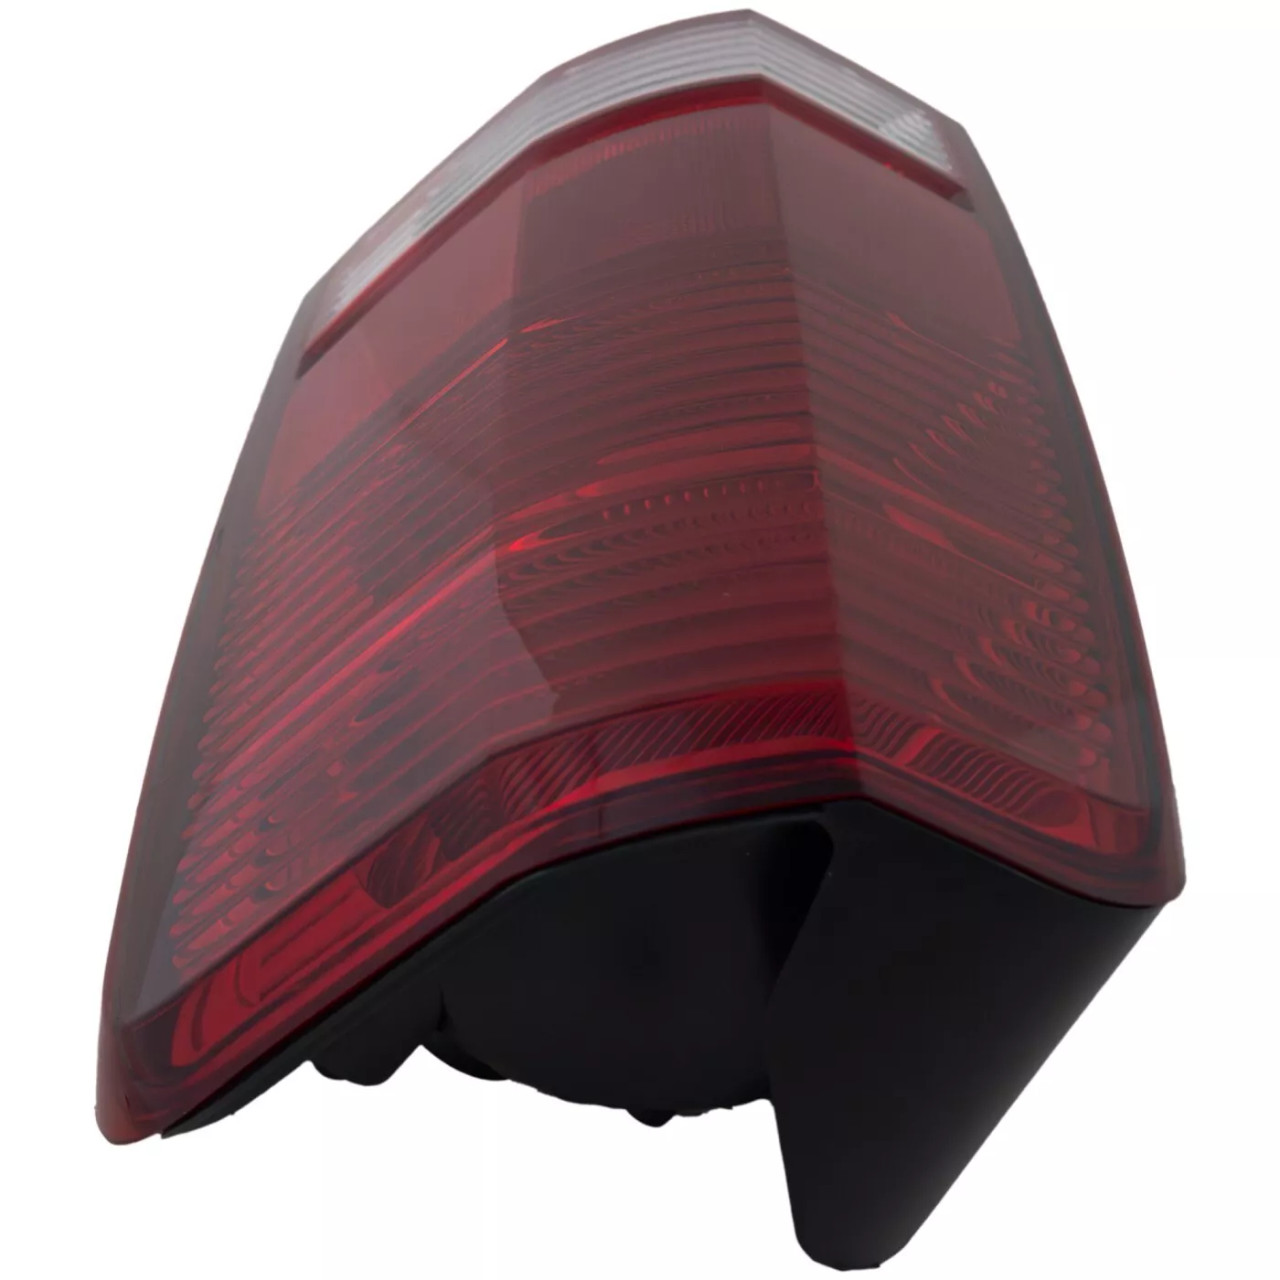 Halogen Tail Light For 2007-2011 Dodge Nitro Right Clear & Red Lens